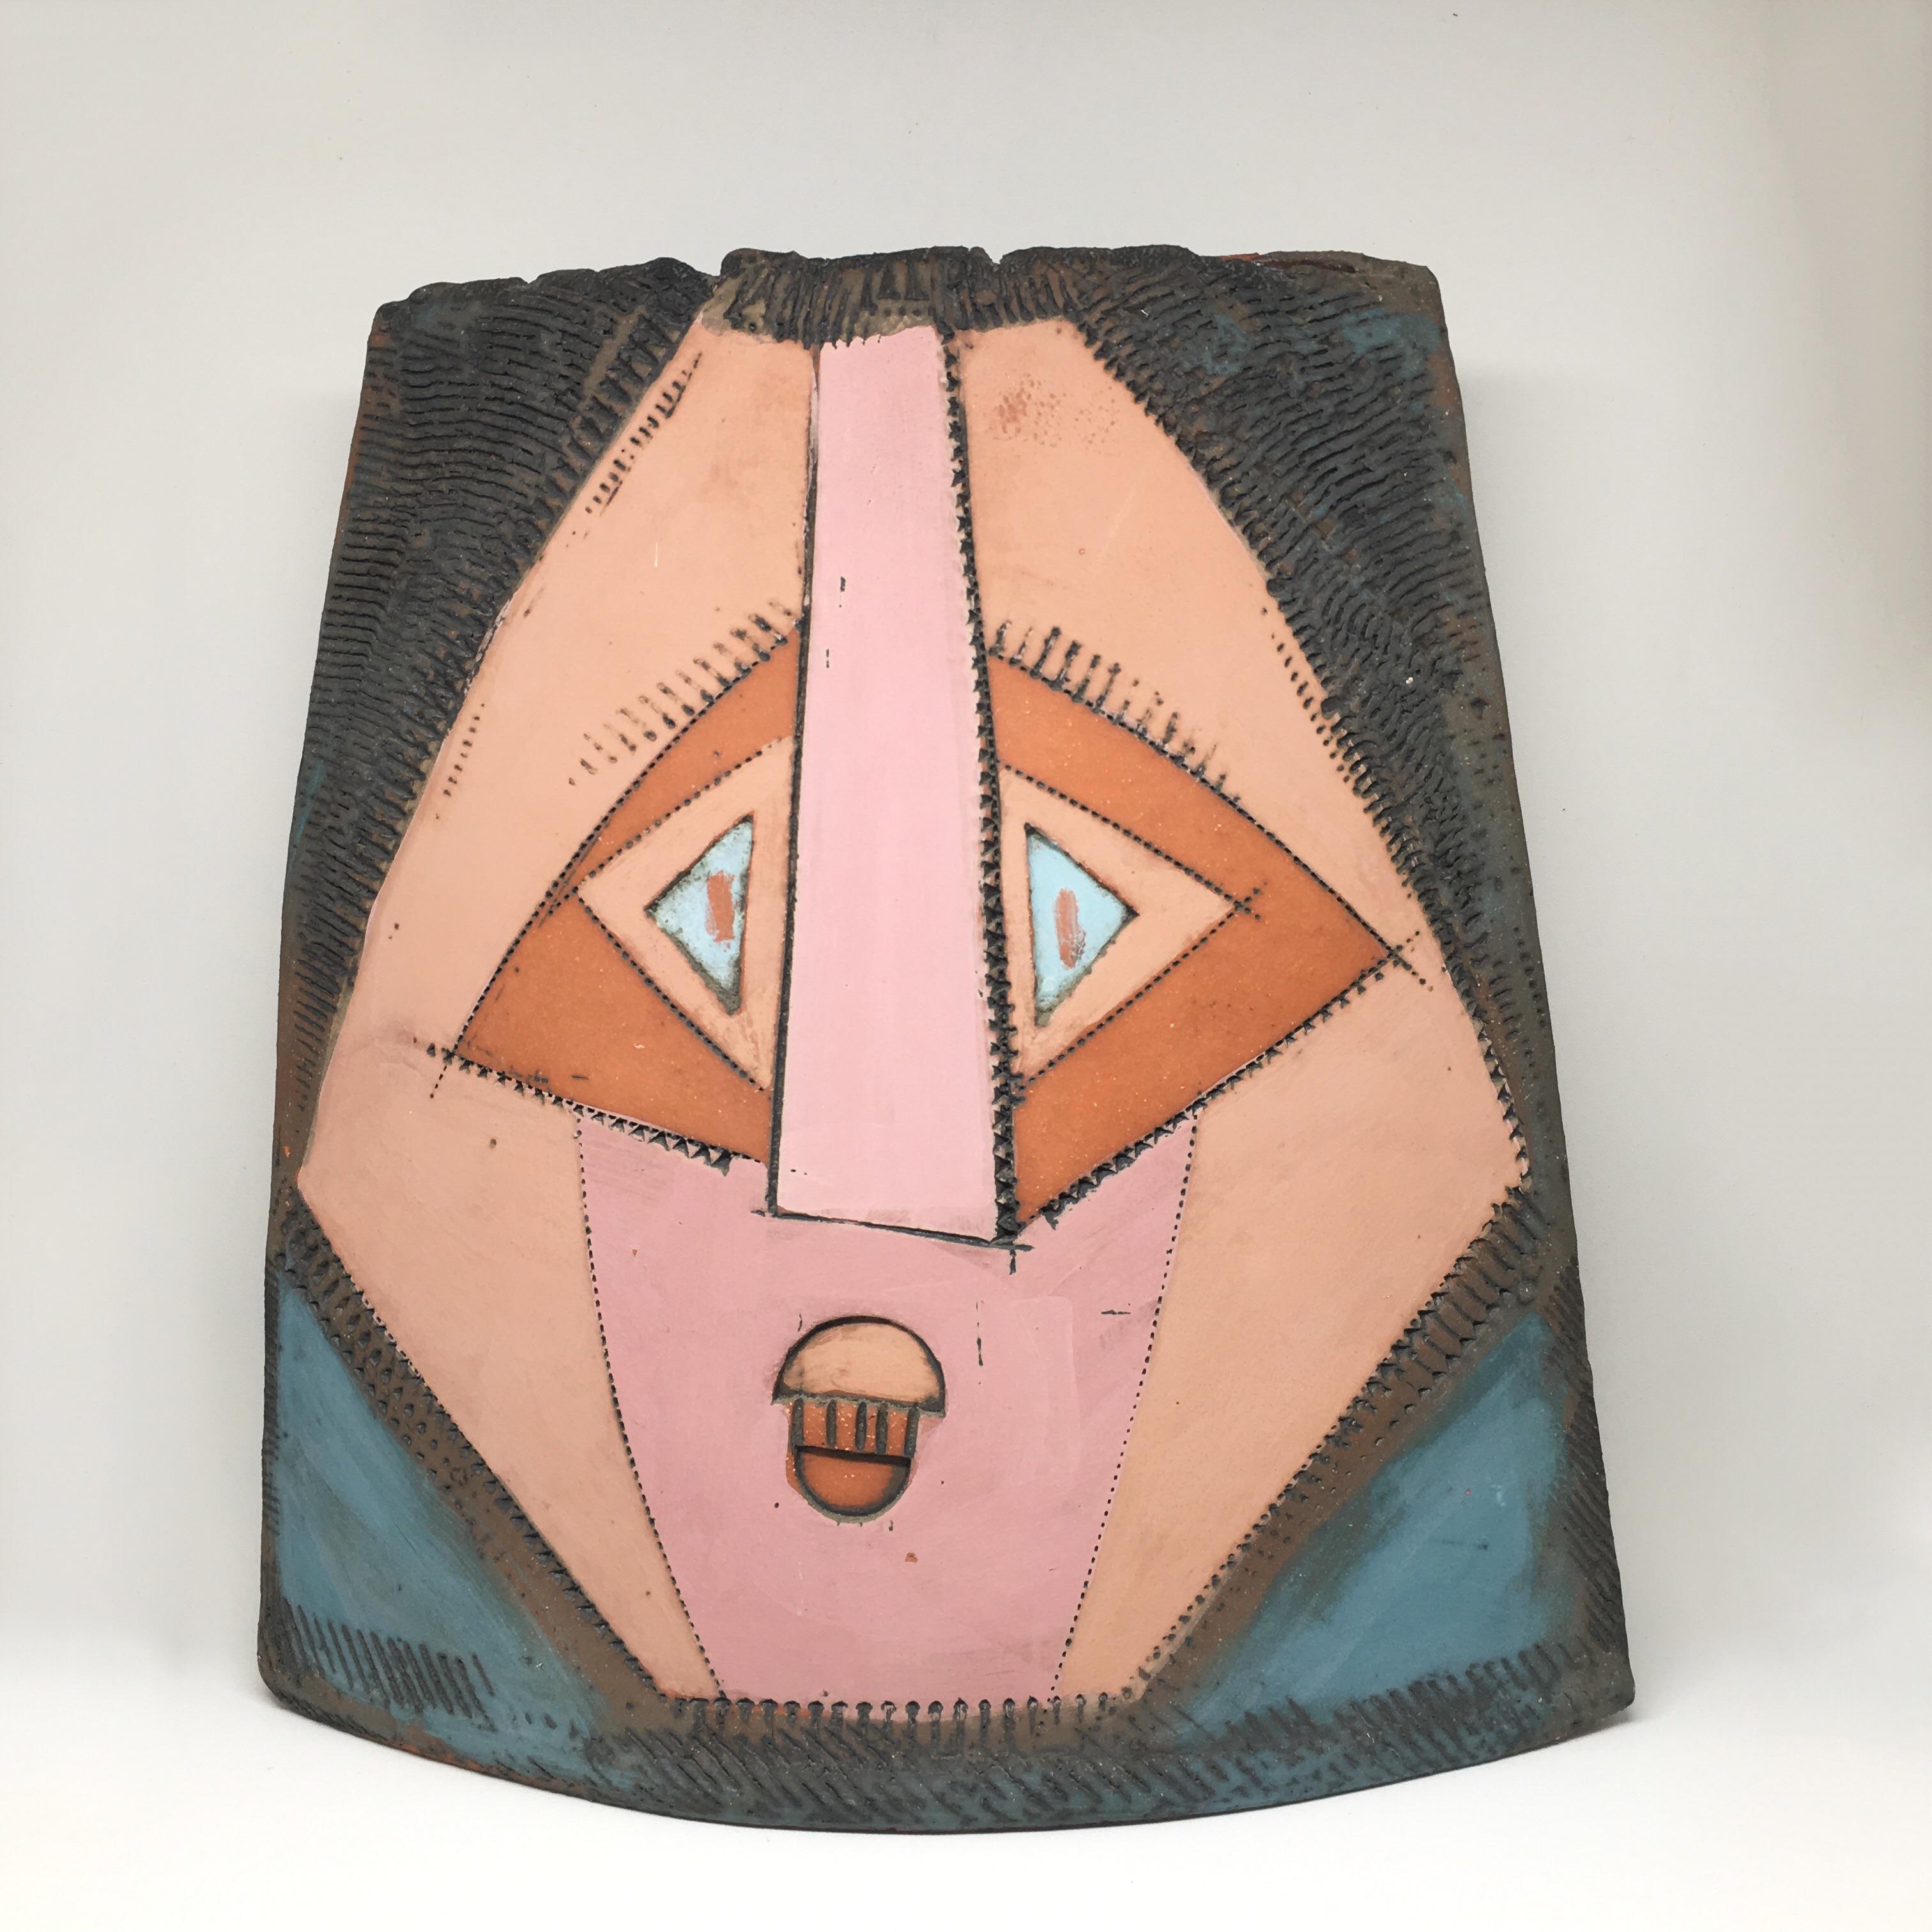 1986 Artist signed cubist faces studio pottery vase with surreal faces on both sides. One side portrays two faces (perhaps in a lovers embrace) and a third single face on the opposite side. Stunning colors throughout this immaculate piece.